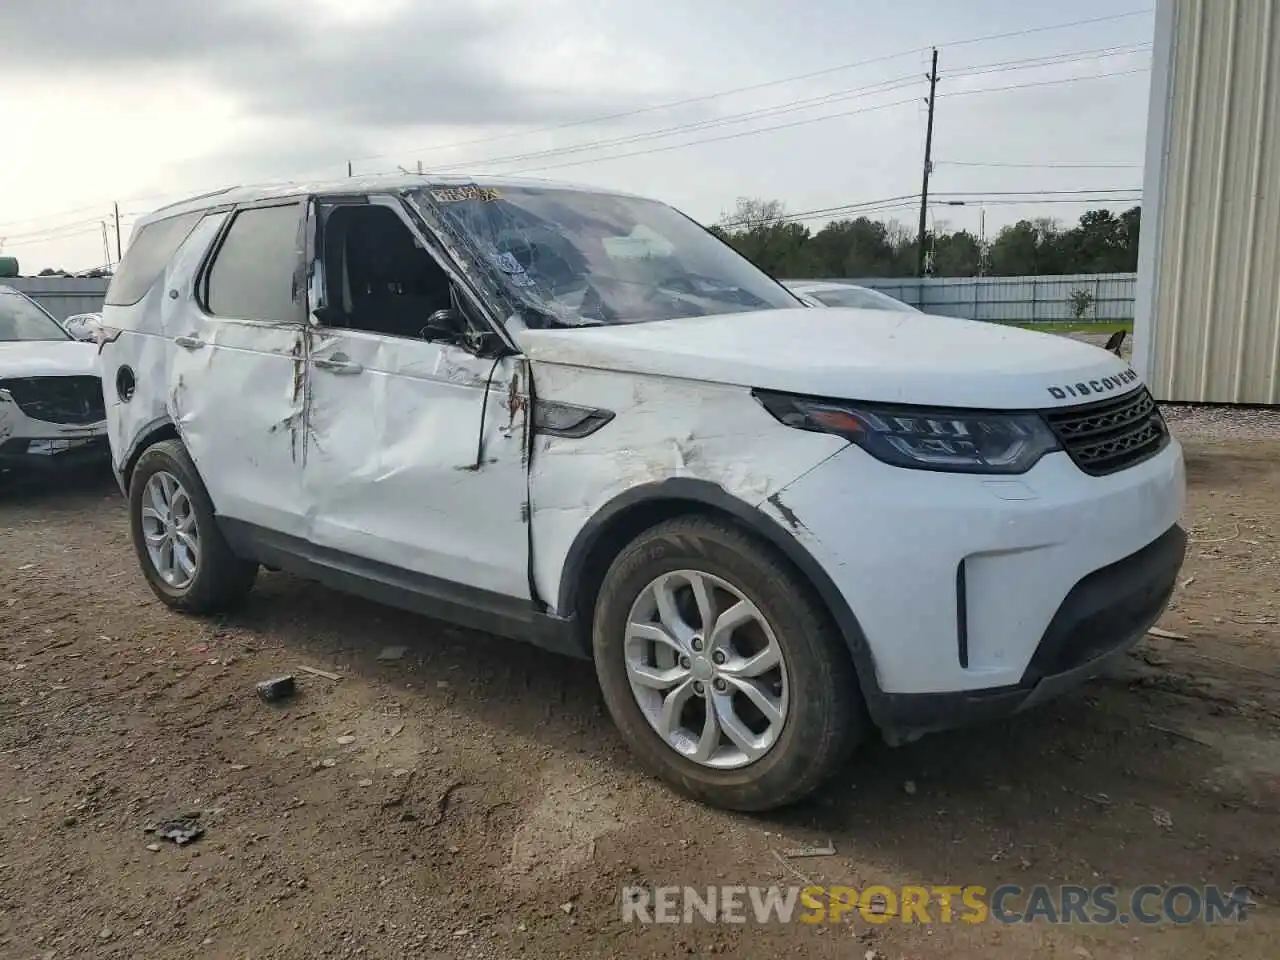 4 Photograph of a damaged car SALRG2RV0L2428116 LAND ROVER DISCOVERY 2020